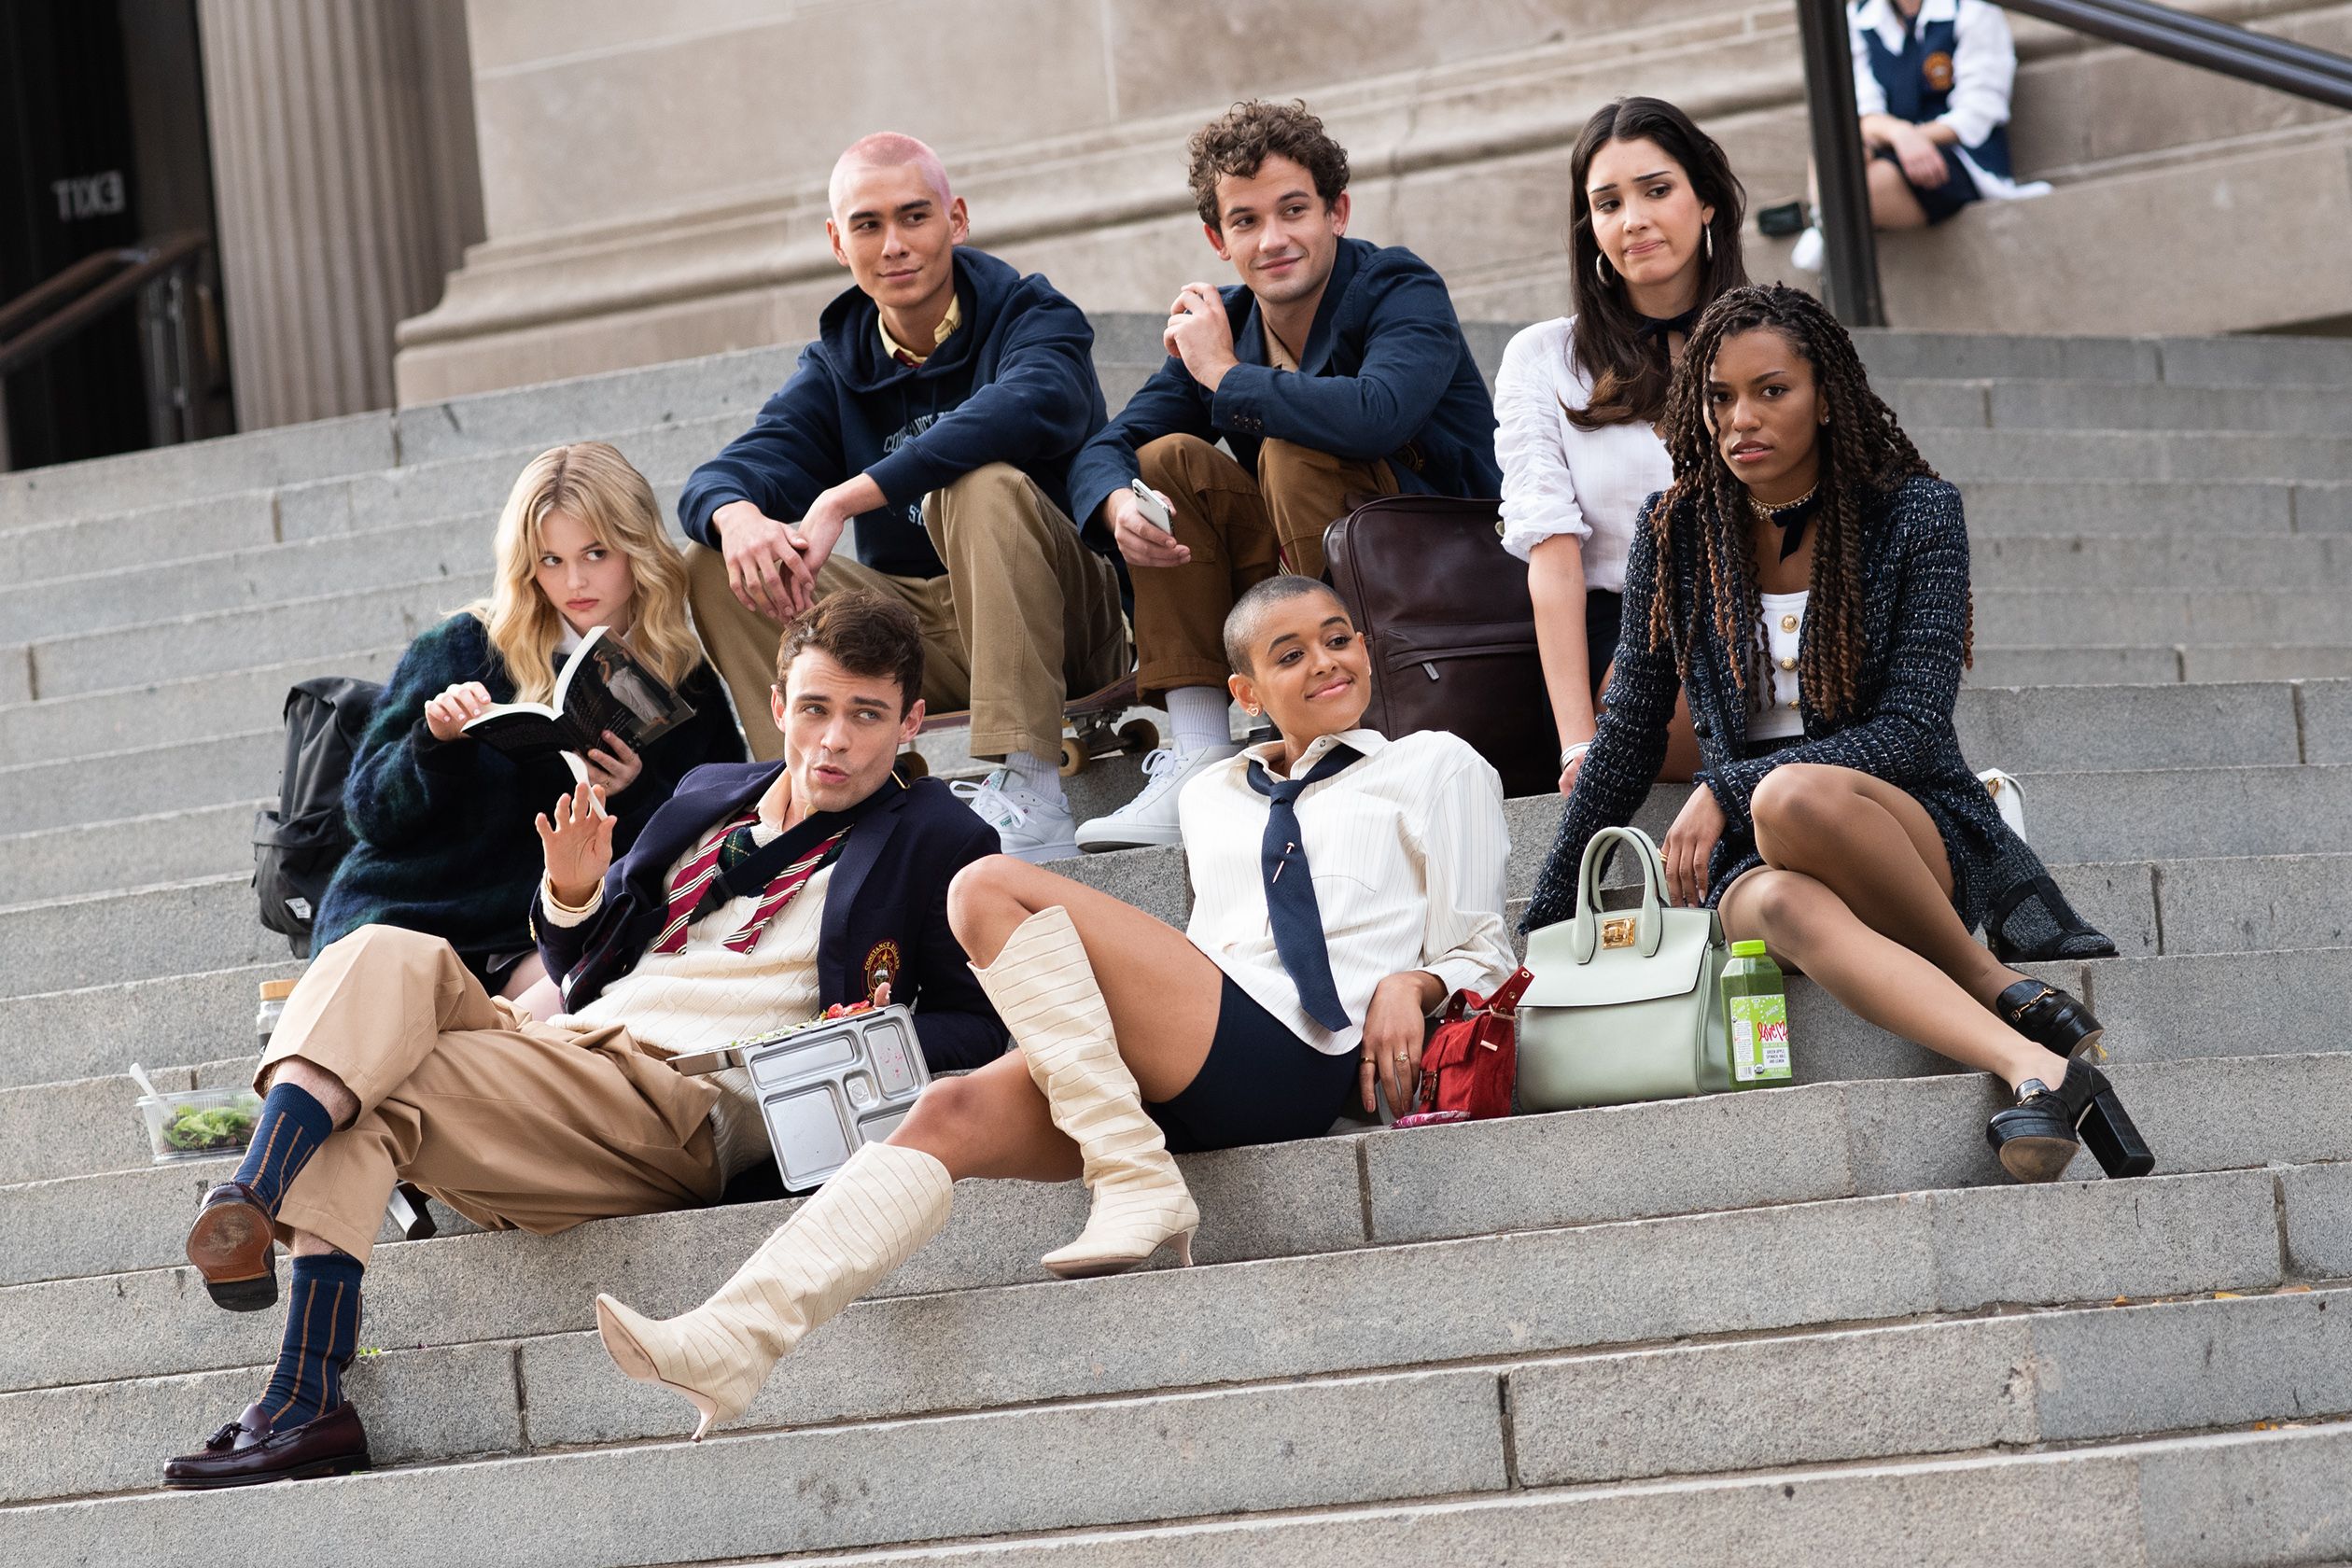 Gossip Girl Reboot Officially Arrives on HBOmax in July